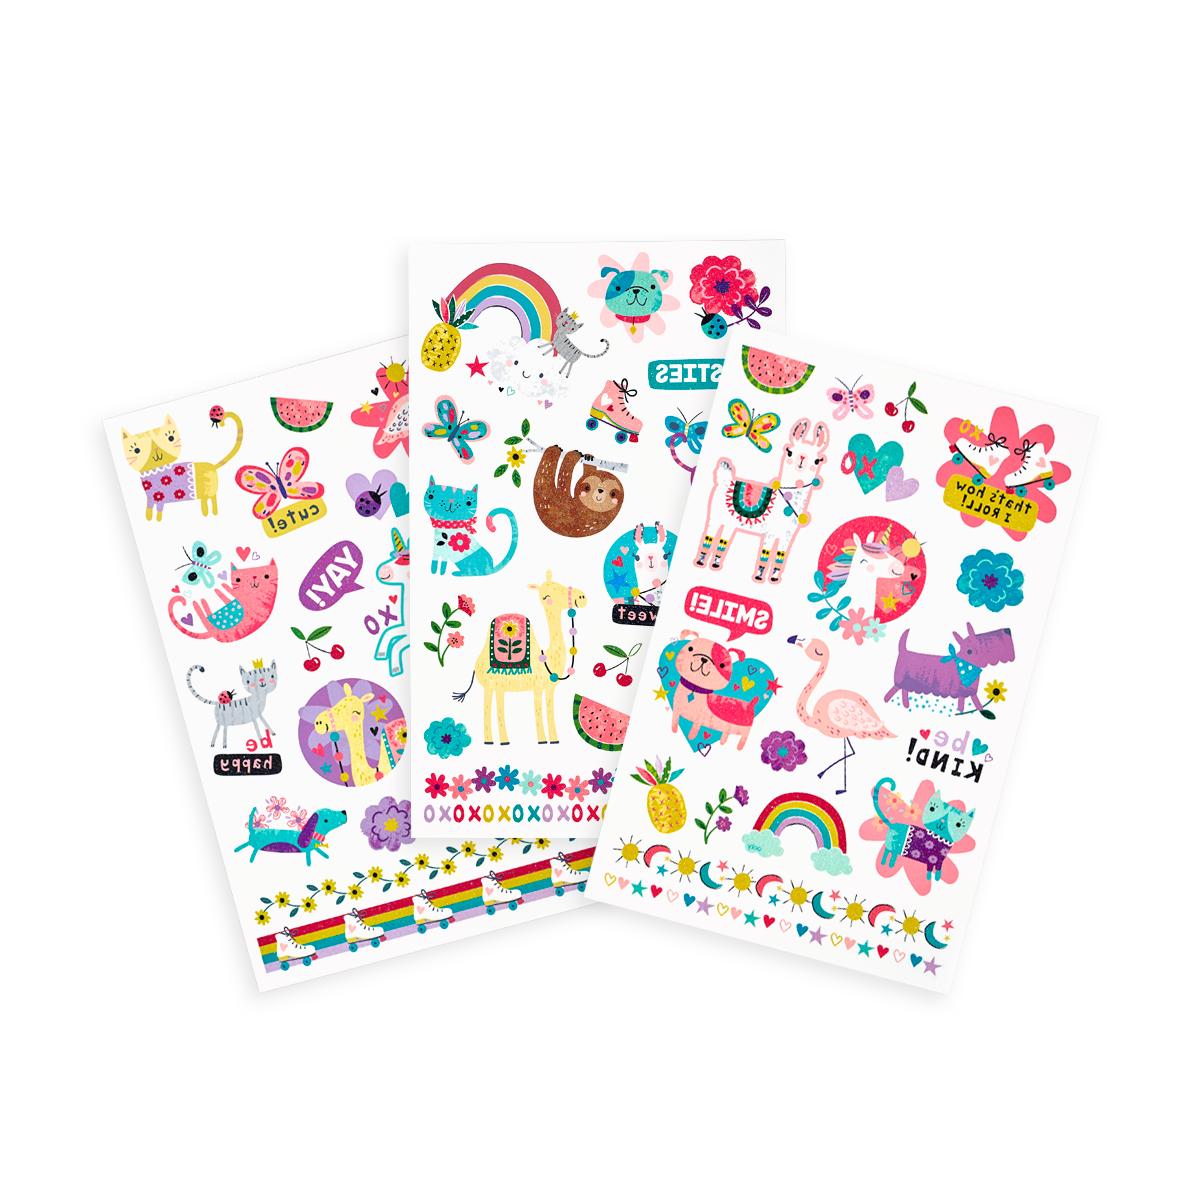 Funny Pun Sticker Pack Sticker Pack Funny Stickers Cute Pun Gifts  Valentines Gifts BFF Stickers Valentines Stickers 25% OFF 